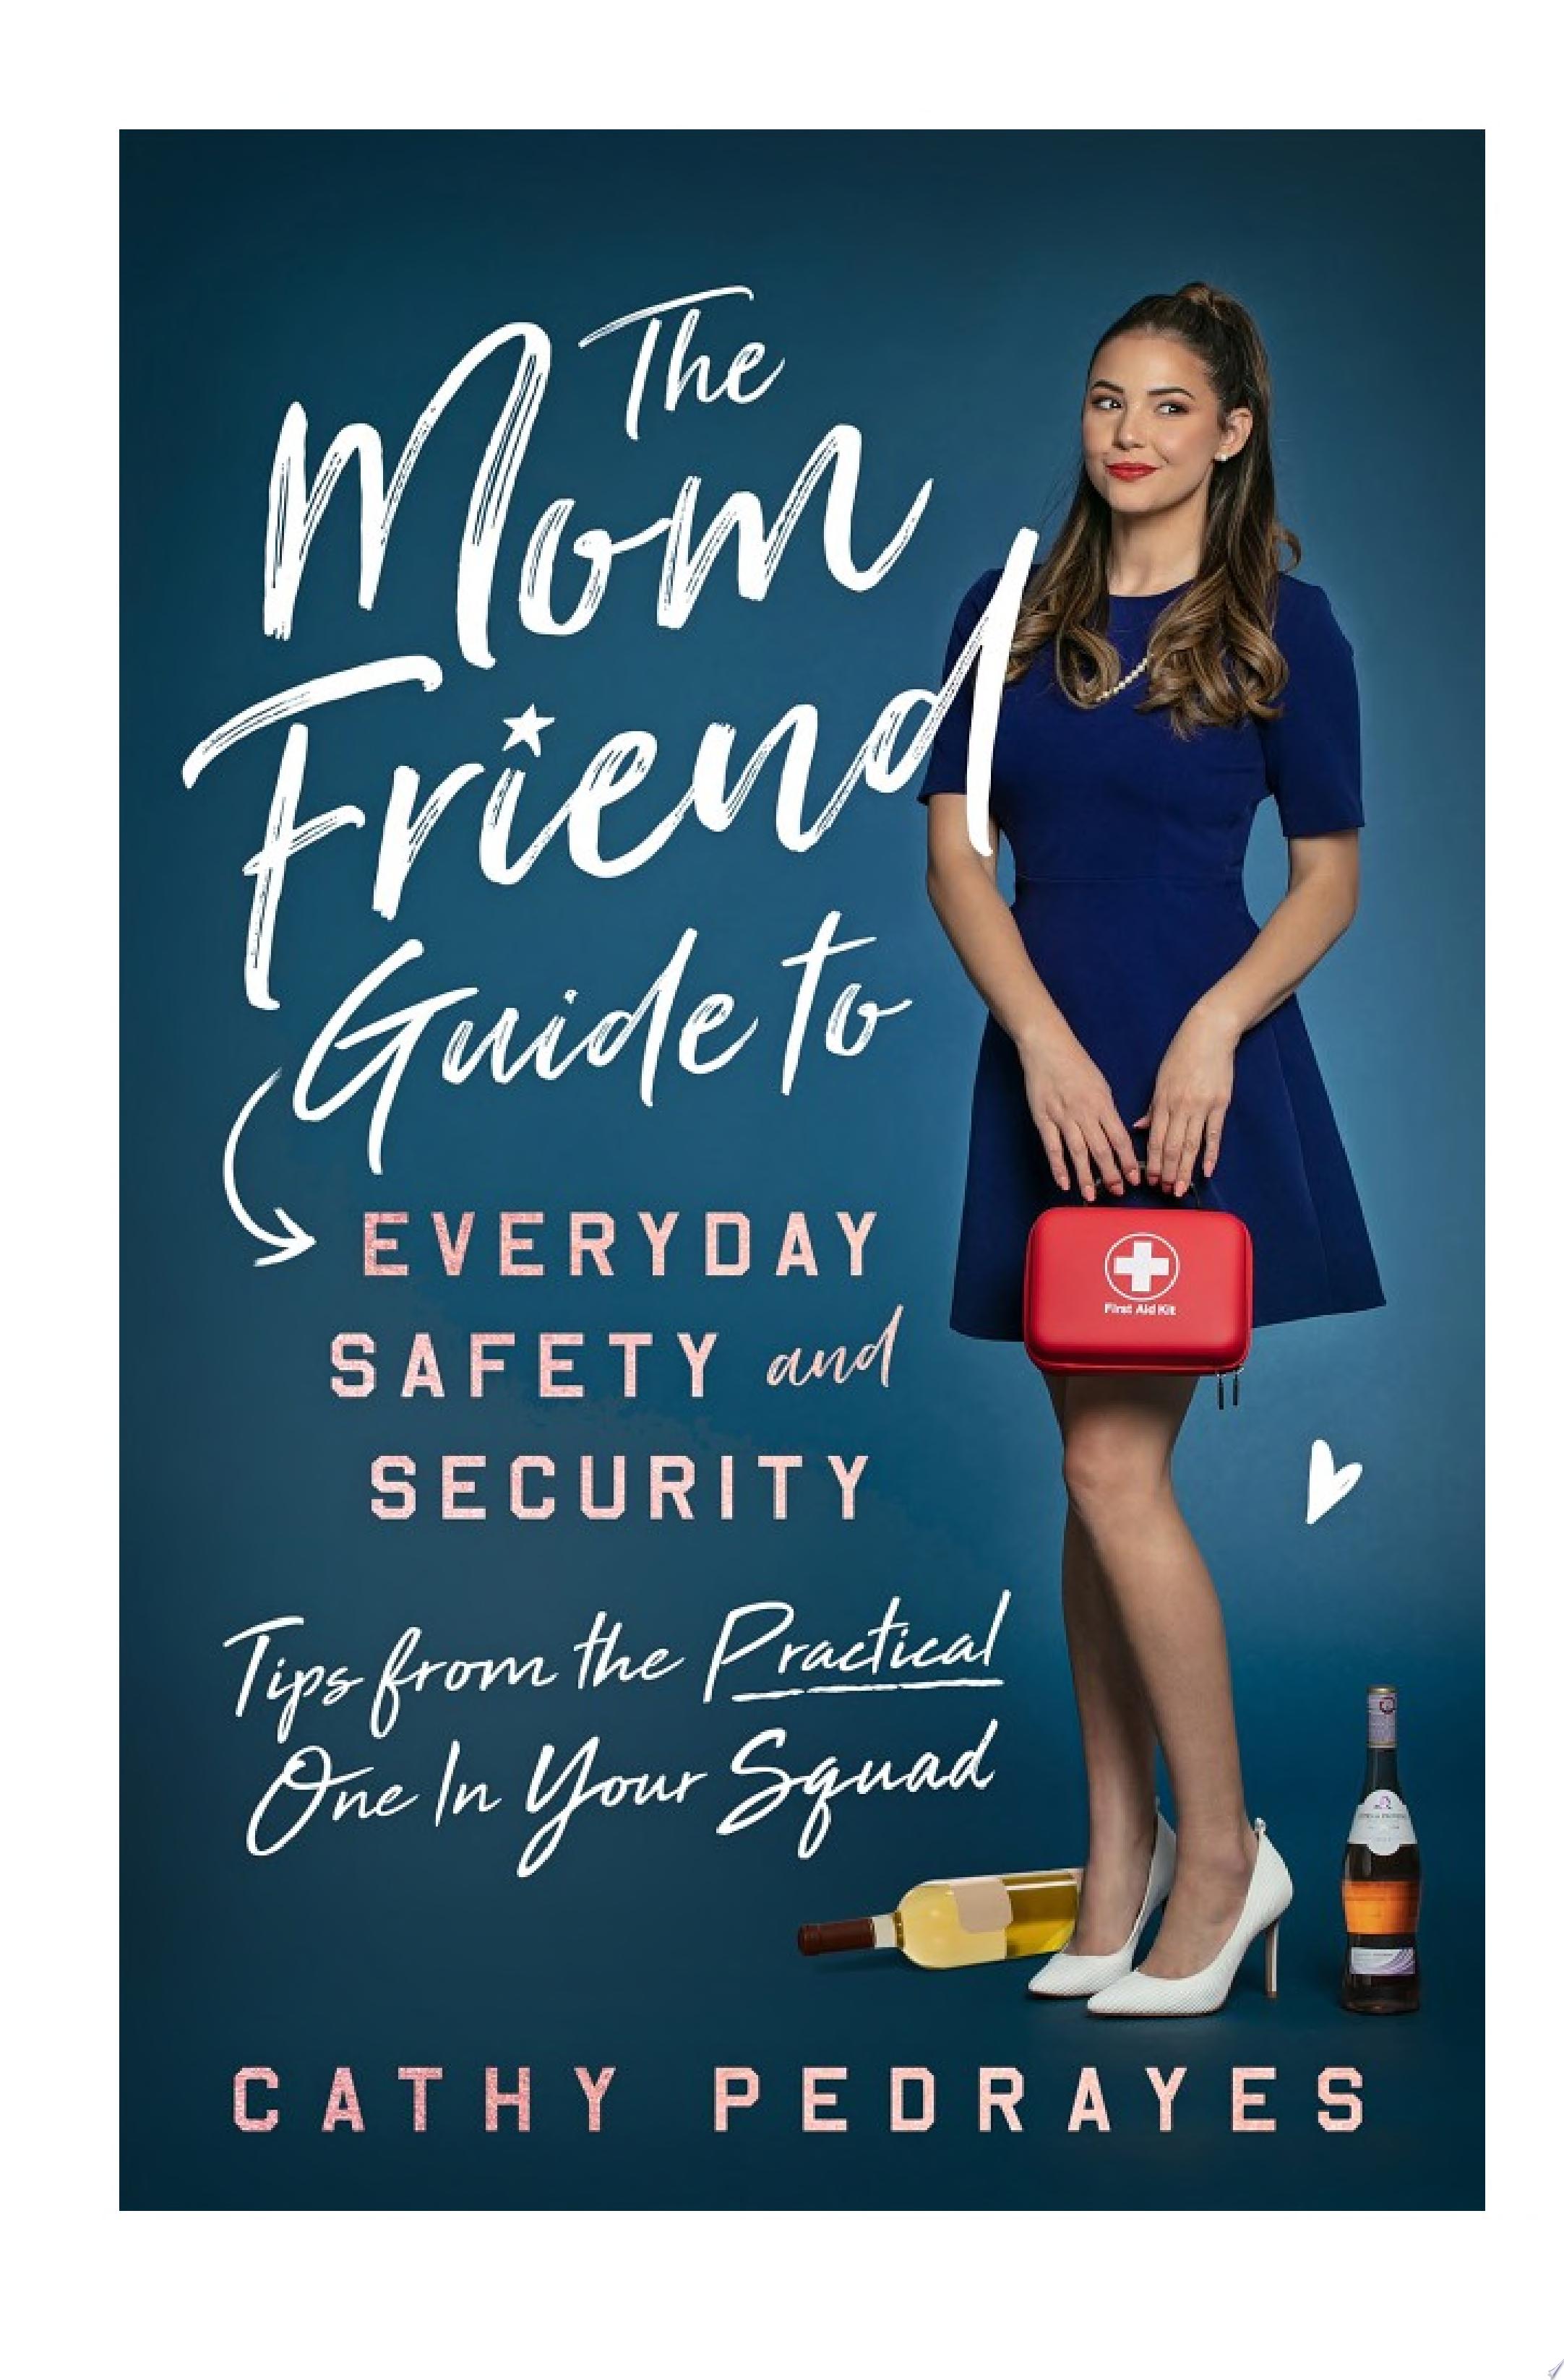 Image for "The Mom Friend Guide to Everyday Safety and Security"